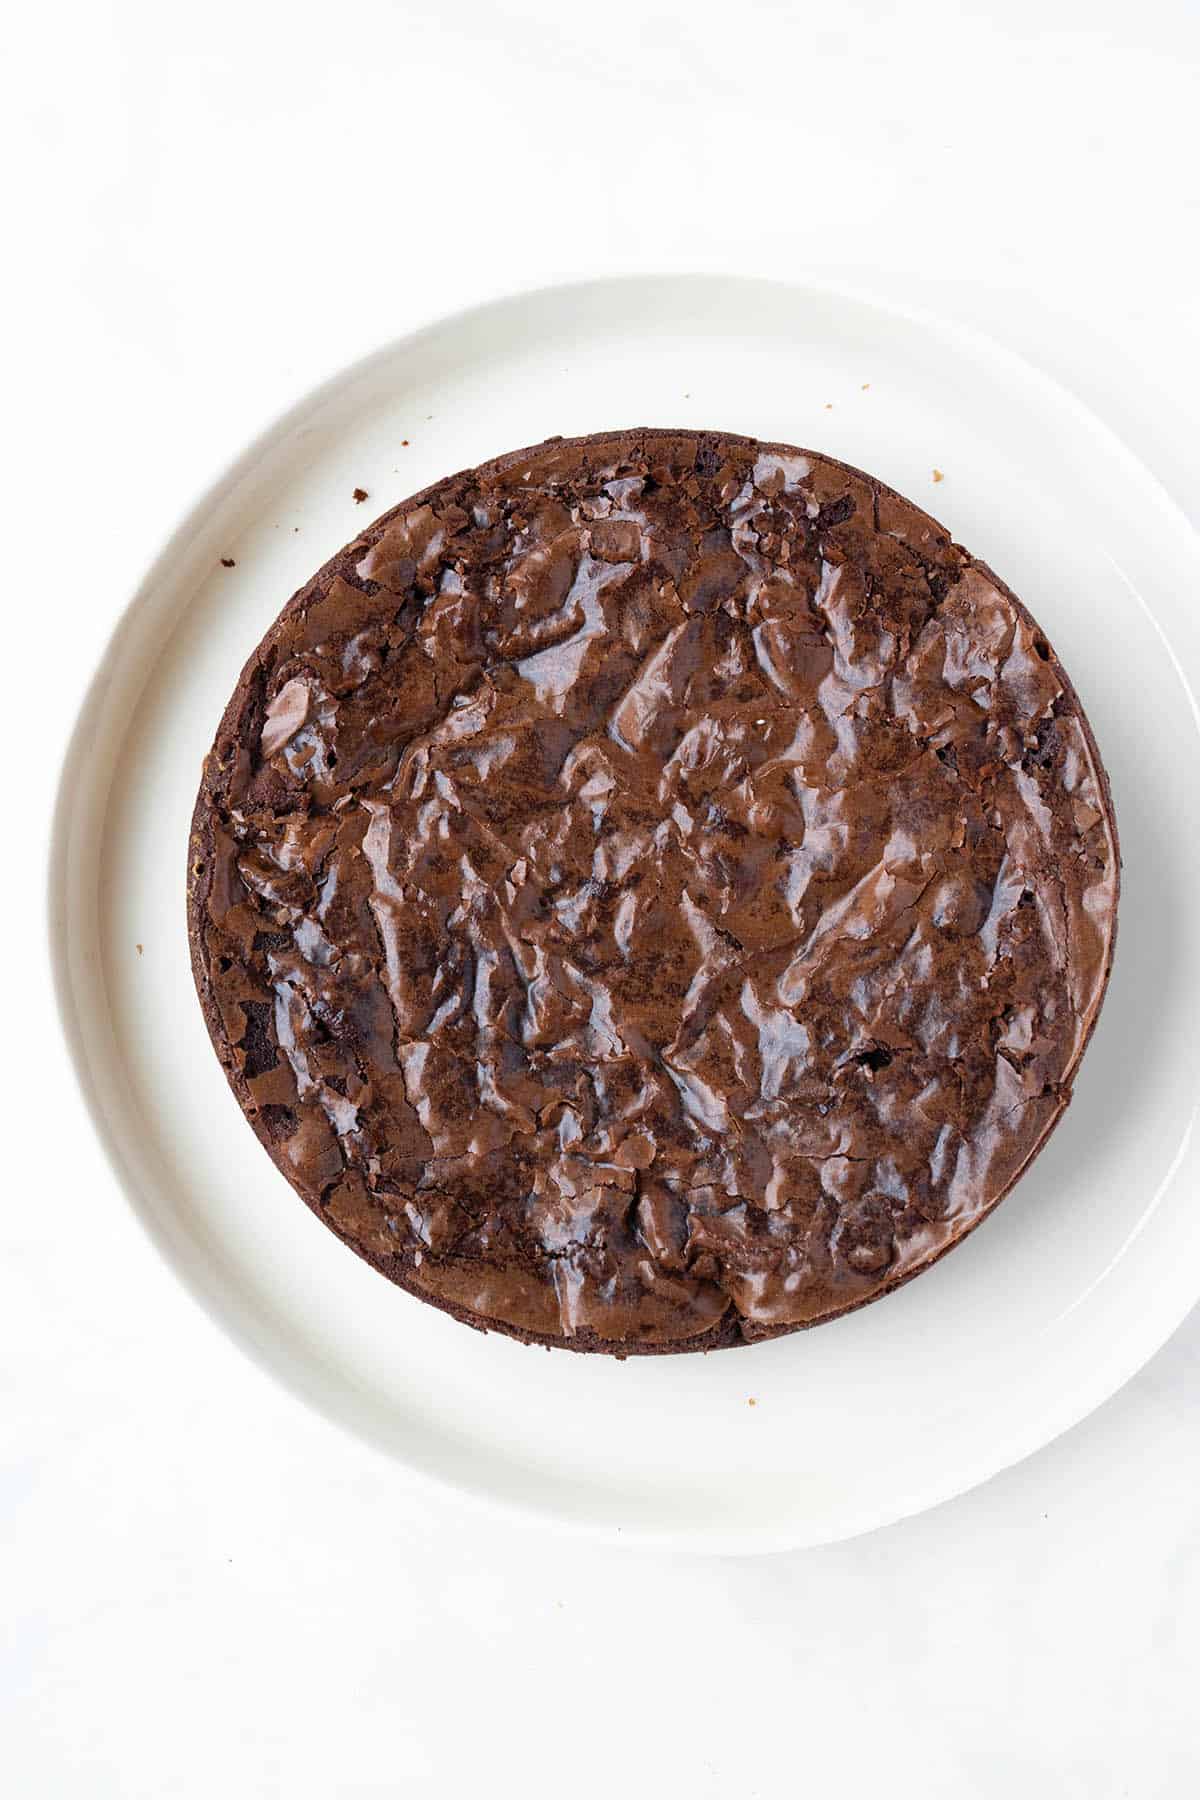 A homemade brownie with a very crinkly top sitting on a white plate.